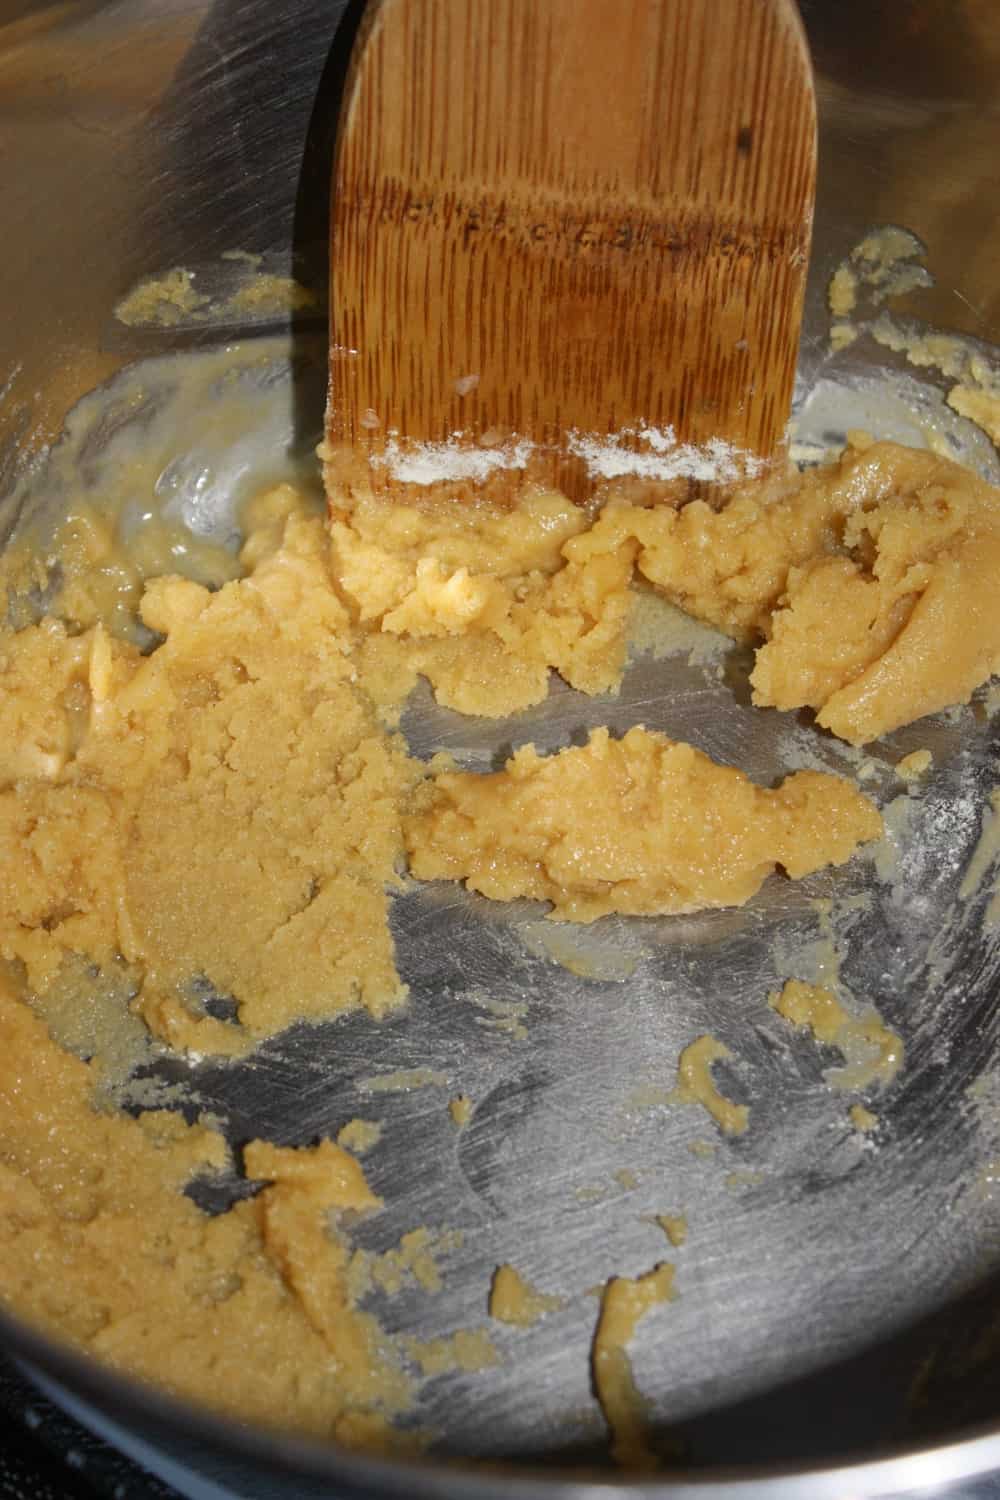 Making the paste.